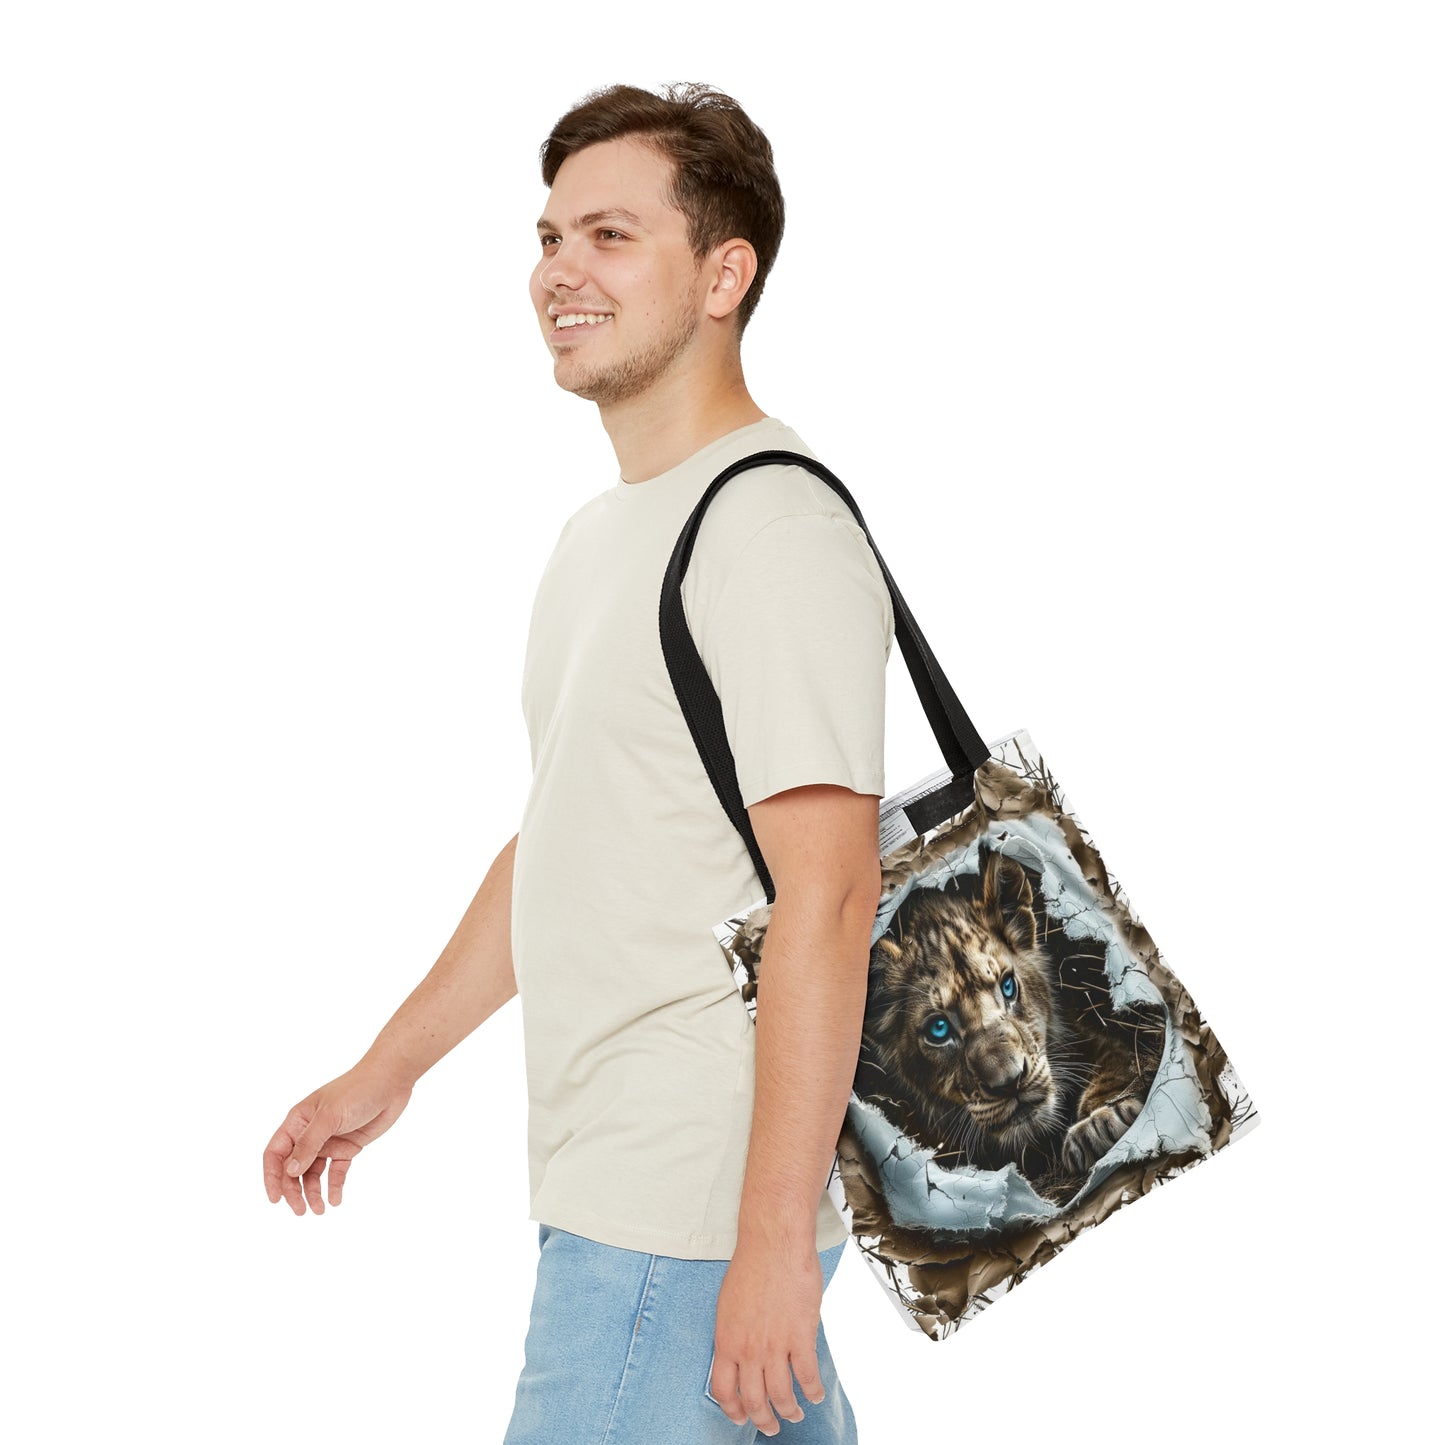 Lion Father with Son Tote Bag